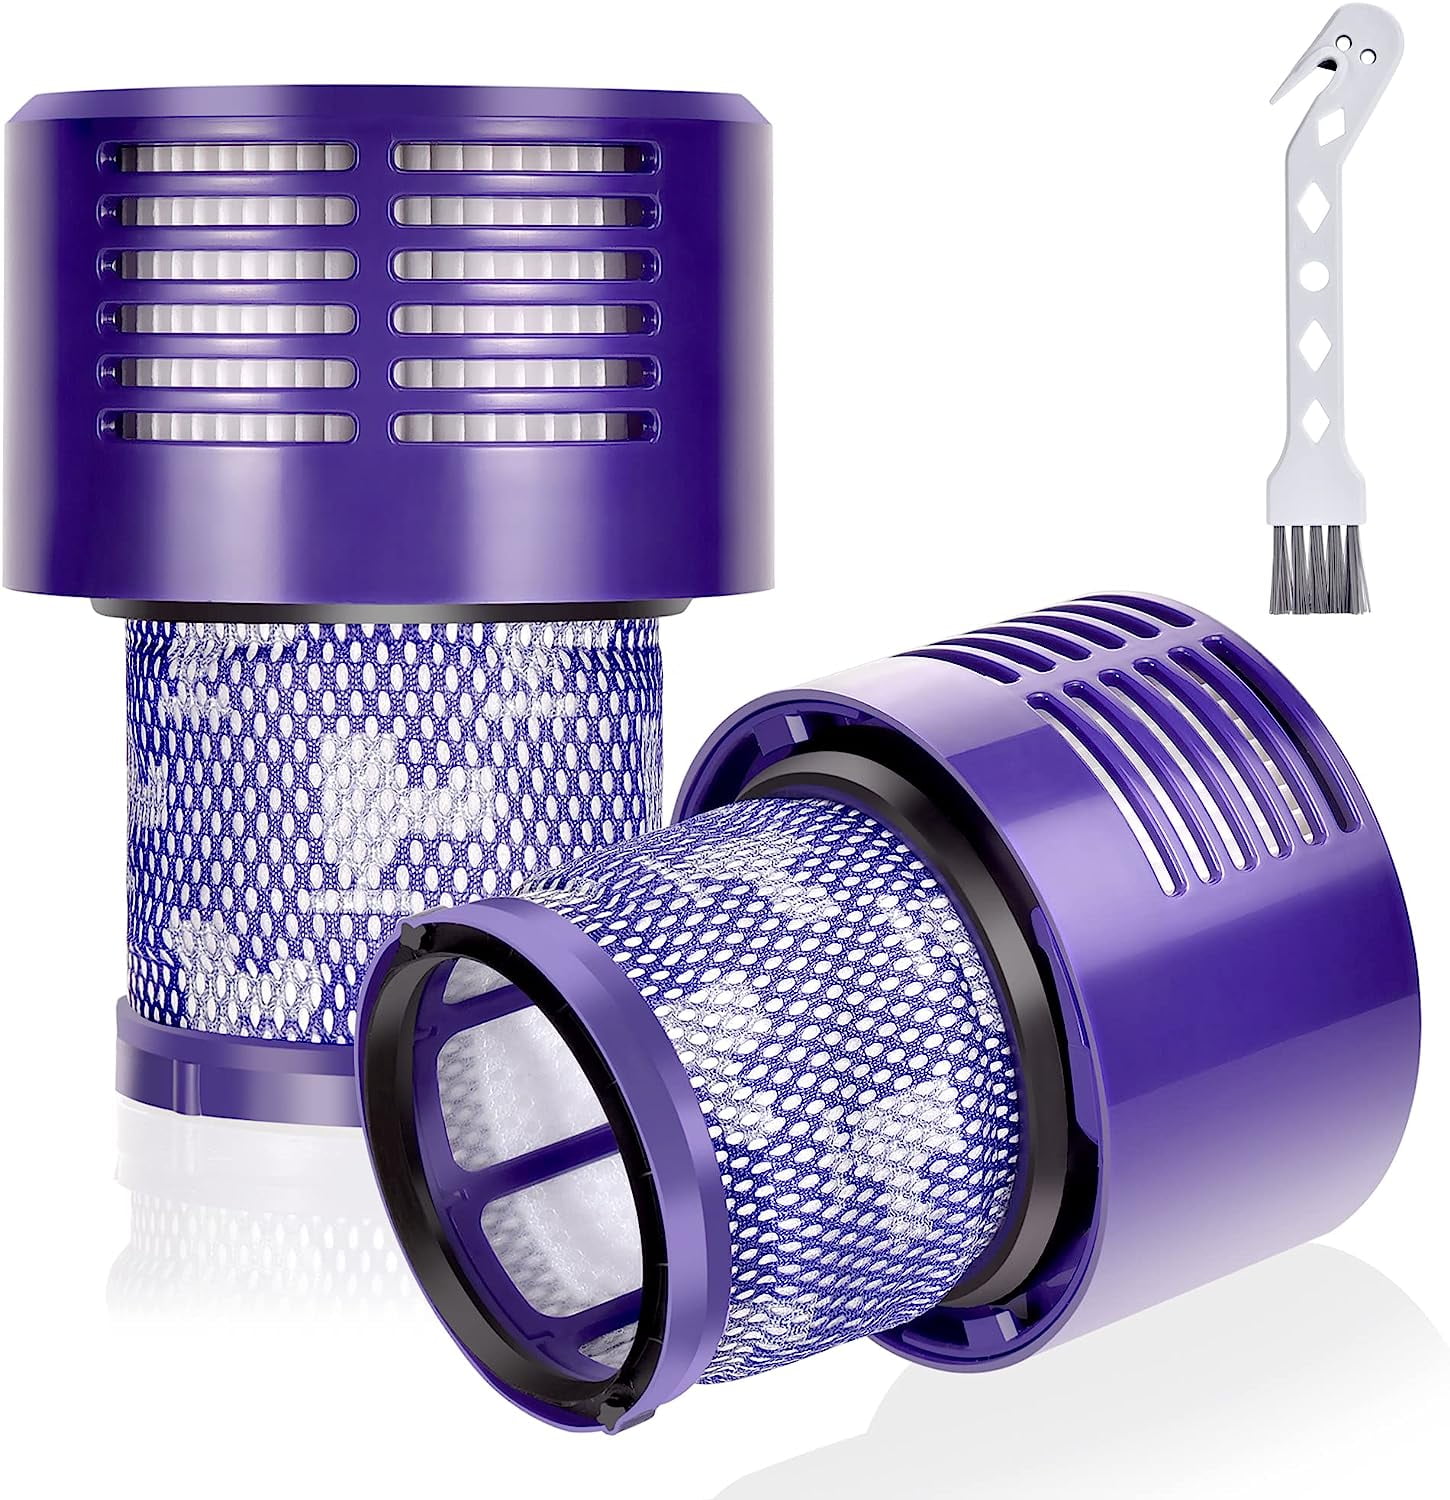 Buy Dyson V10 Cordless Vacuum HEPA Filter from Canada at